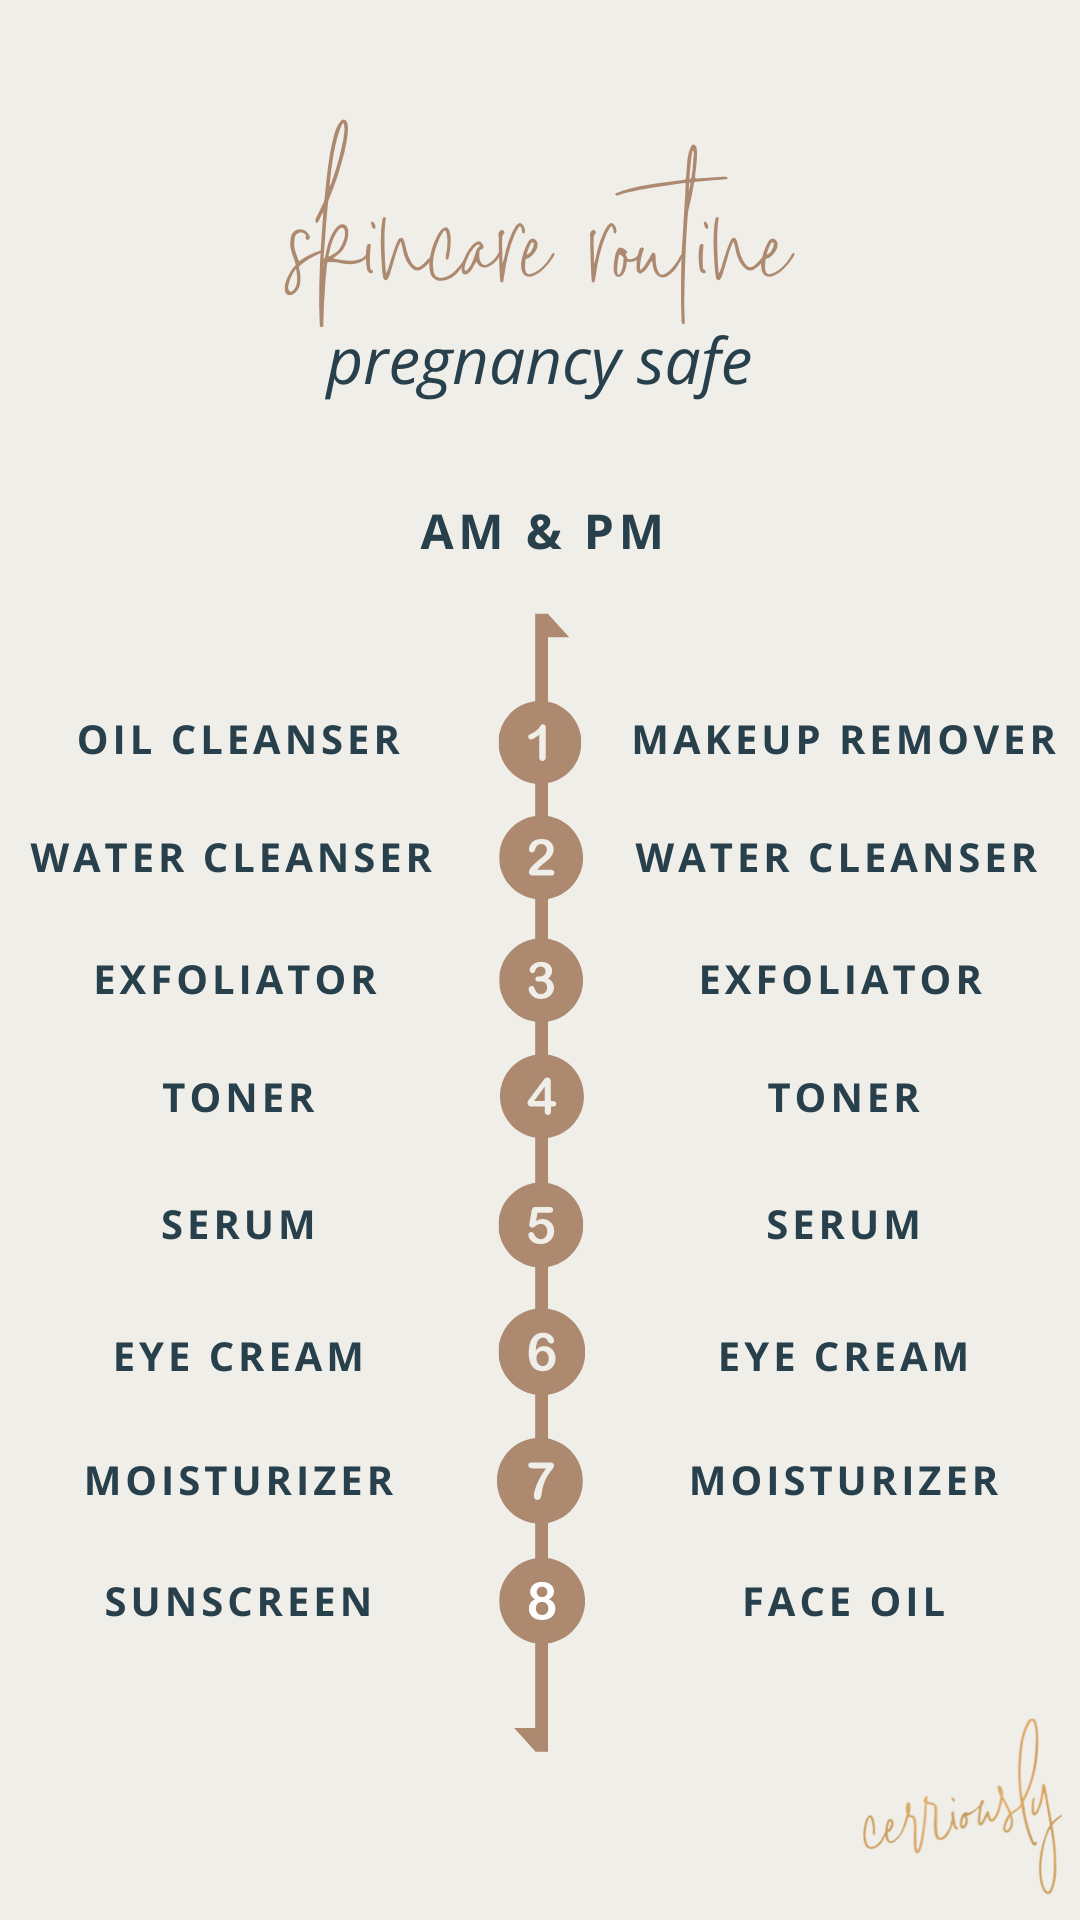 pregnancy safe skincare routine - order of products.png